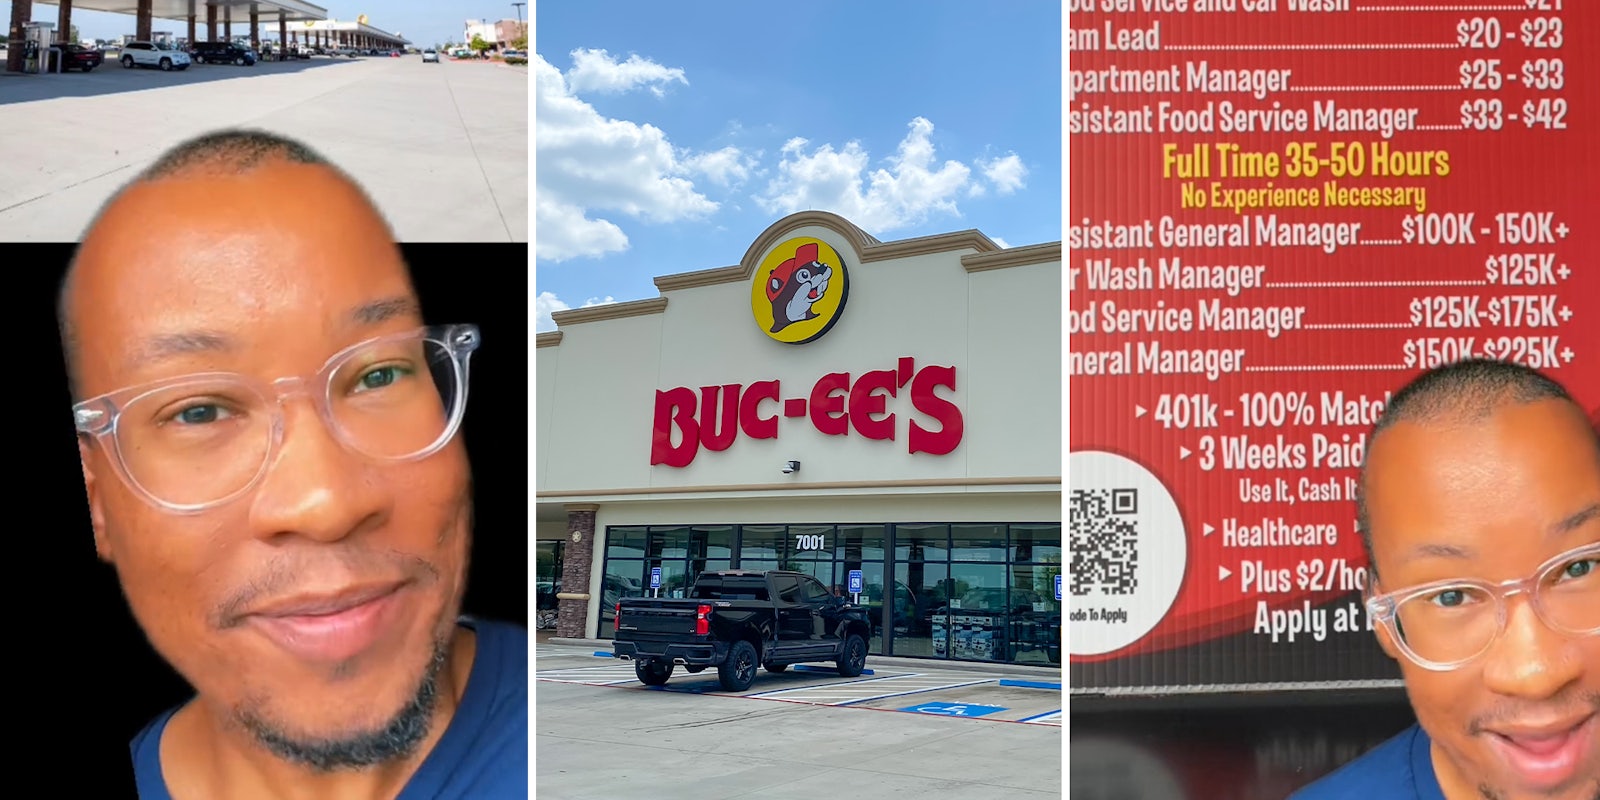 Buc-ee's car wash manager says they make $125K a year